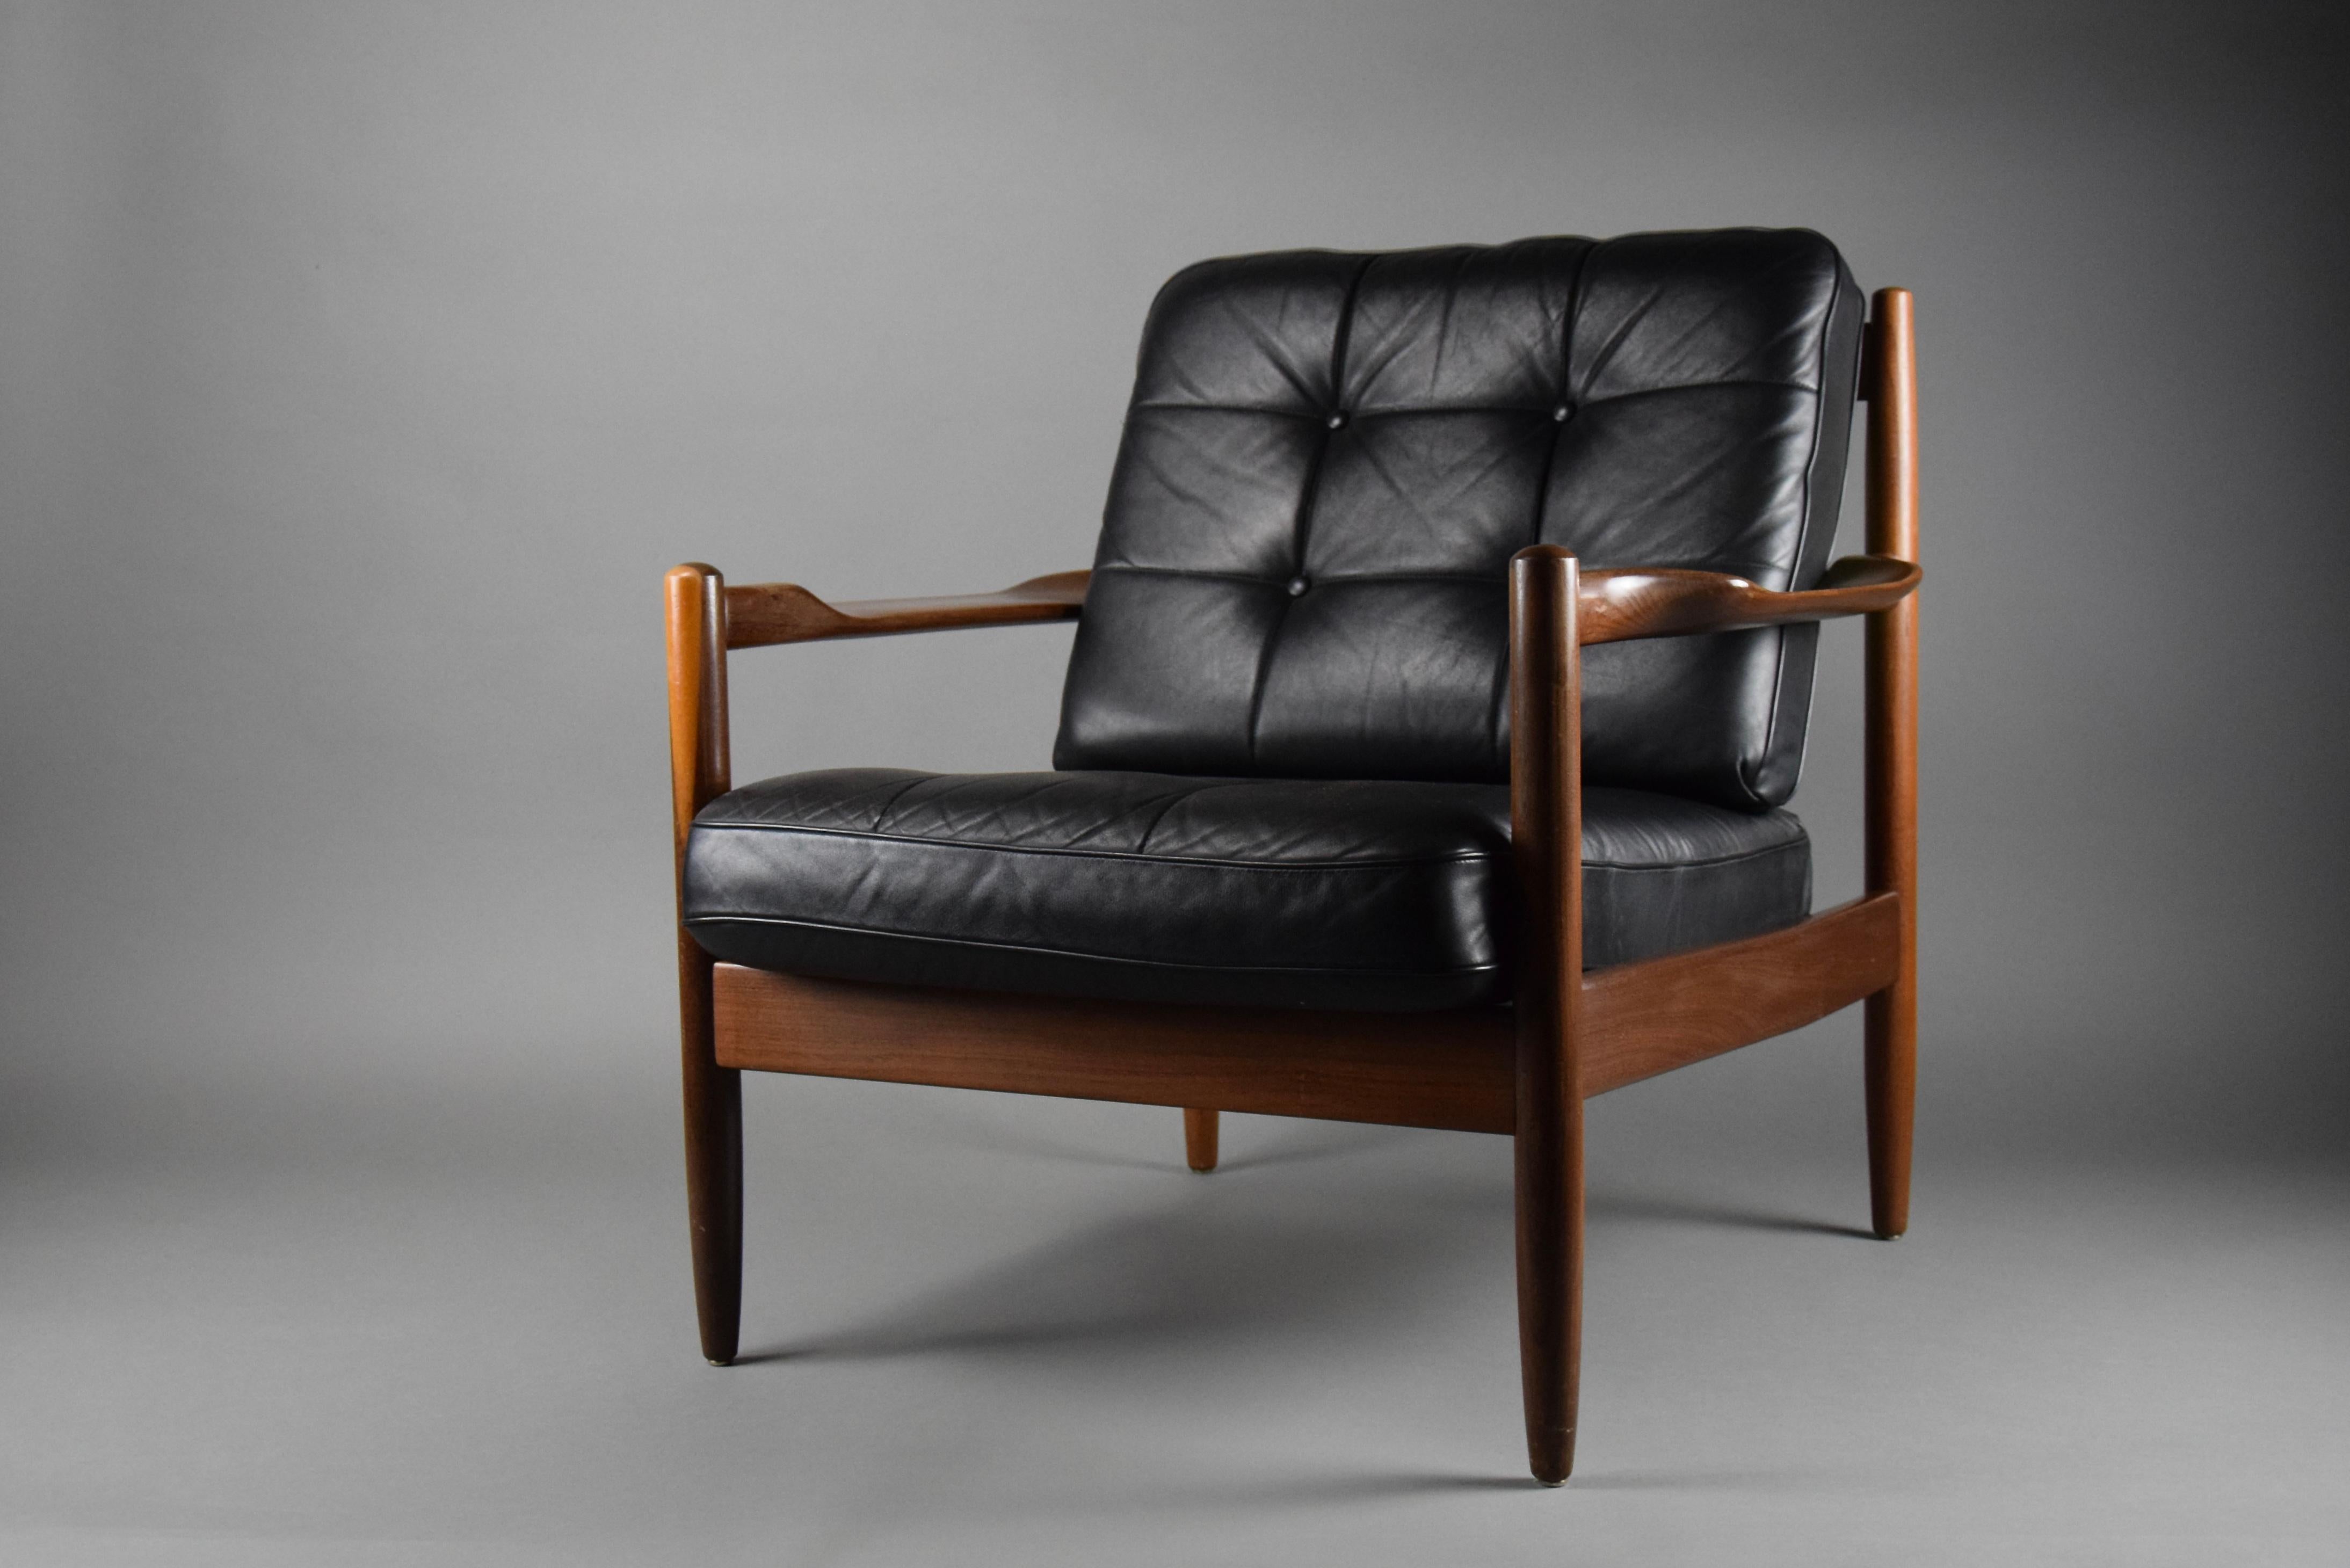 Introducing the Epitome of Mid-Century Elegance: The Jatoba Wooden Lounge Chair
Experience timeless luxury in your living space? Look no further than our stunning Mid-Century Jatoba Wooden Lounge Chair.
Craftsmanship Beyond Compare:
Handcrafted from